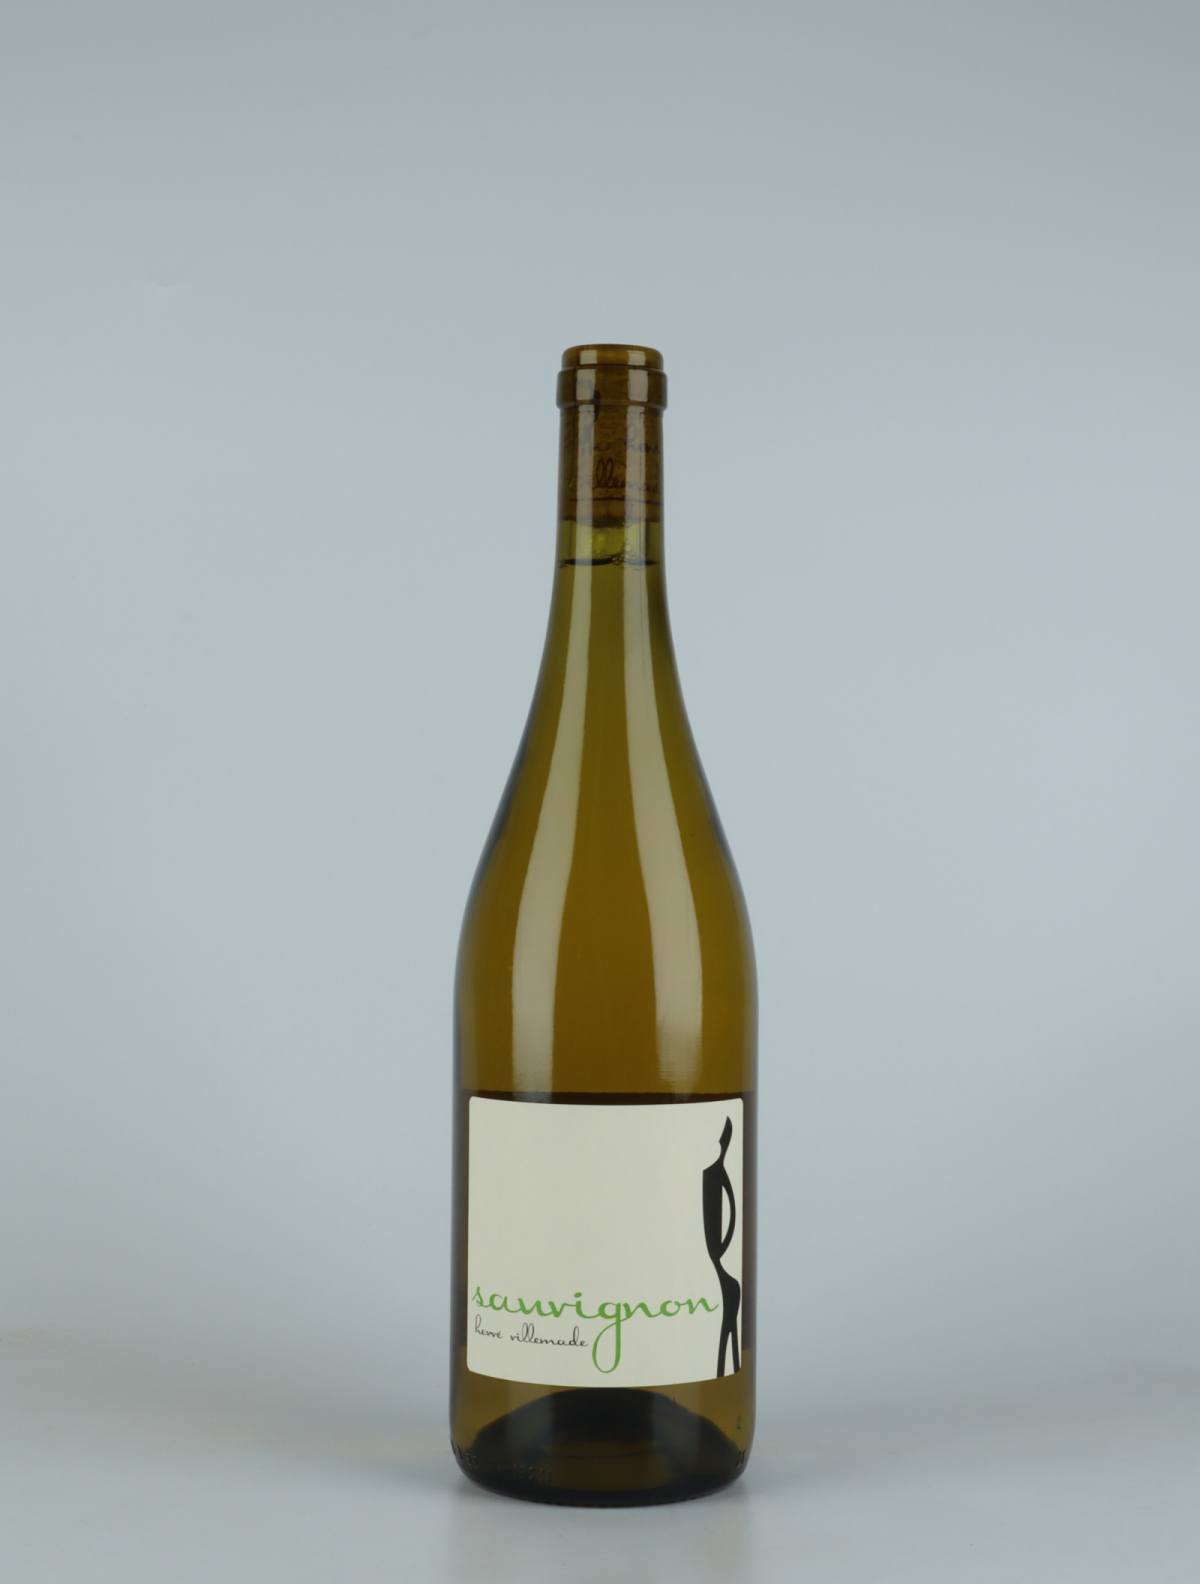 A bottle 2021 Sauvignon Blanc White wine from Hervé Villemade, Loire in France